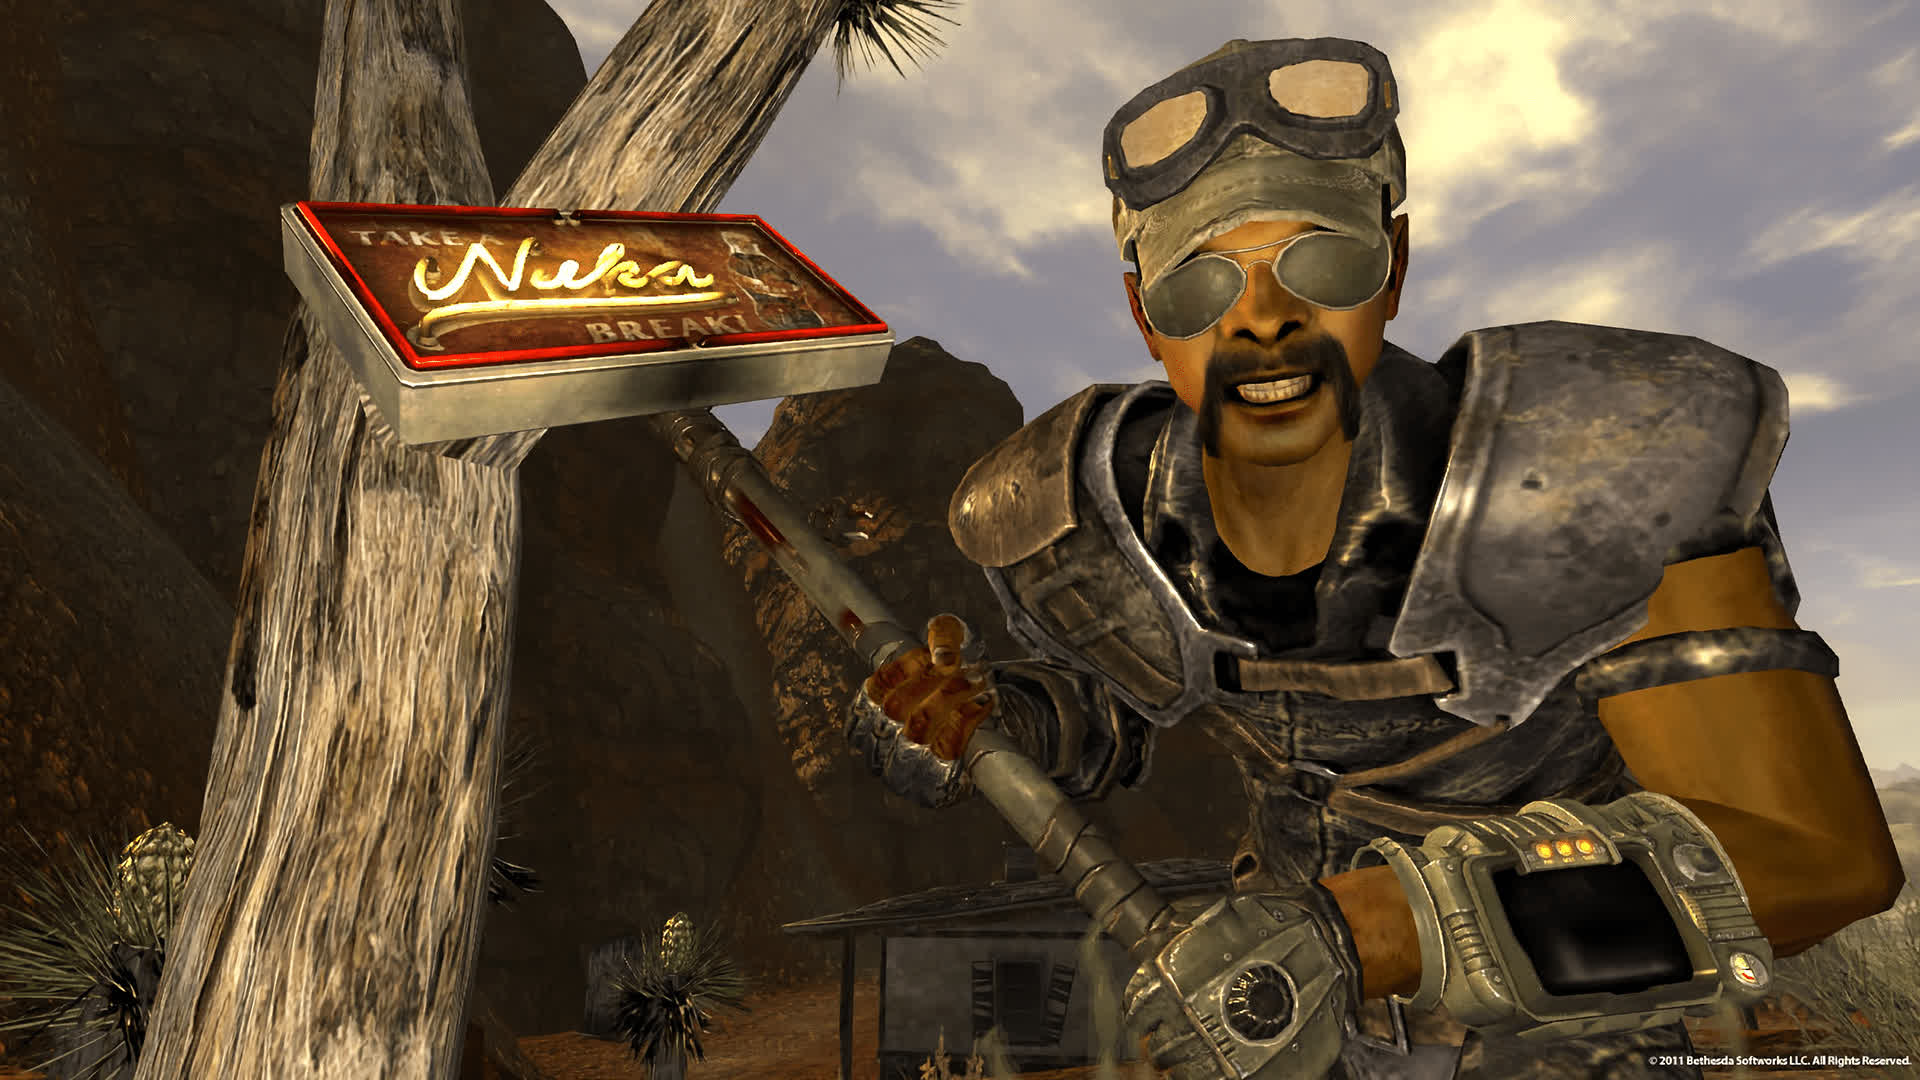 Fallout: New Vegas is free on the Epic Video games Retailer till June 1